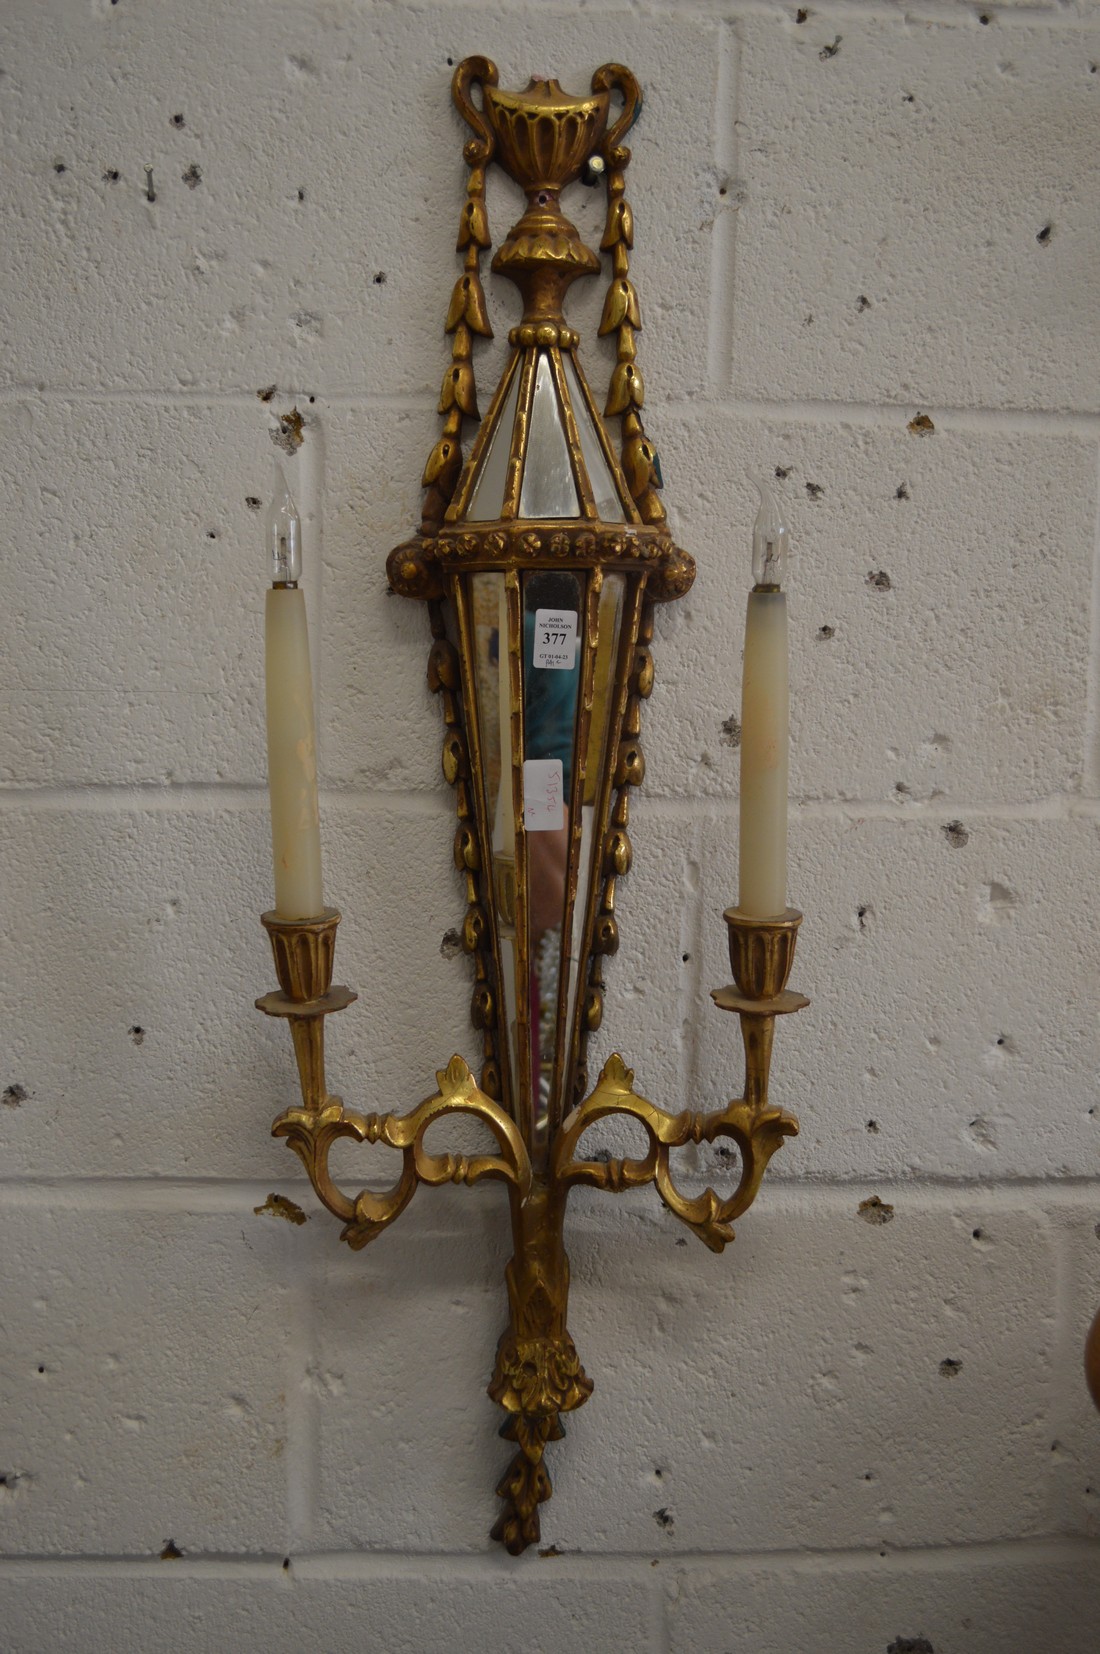 A pair of decorative gilt and mirrored two branch wall appliques.